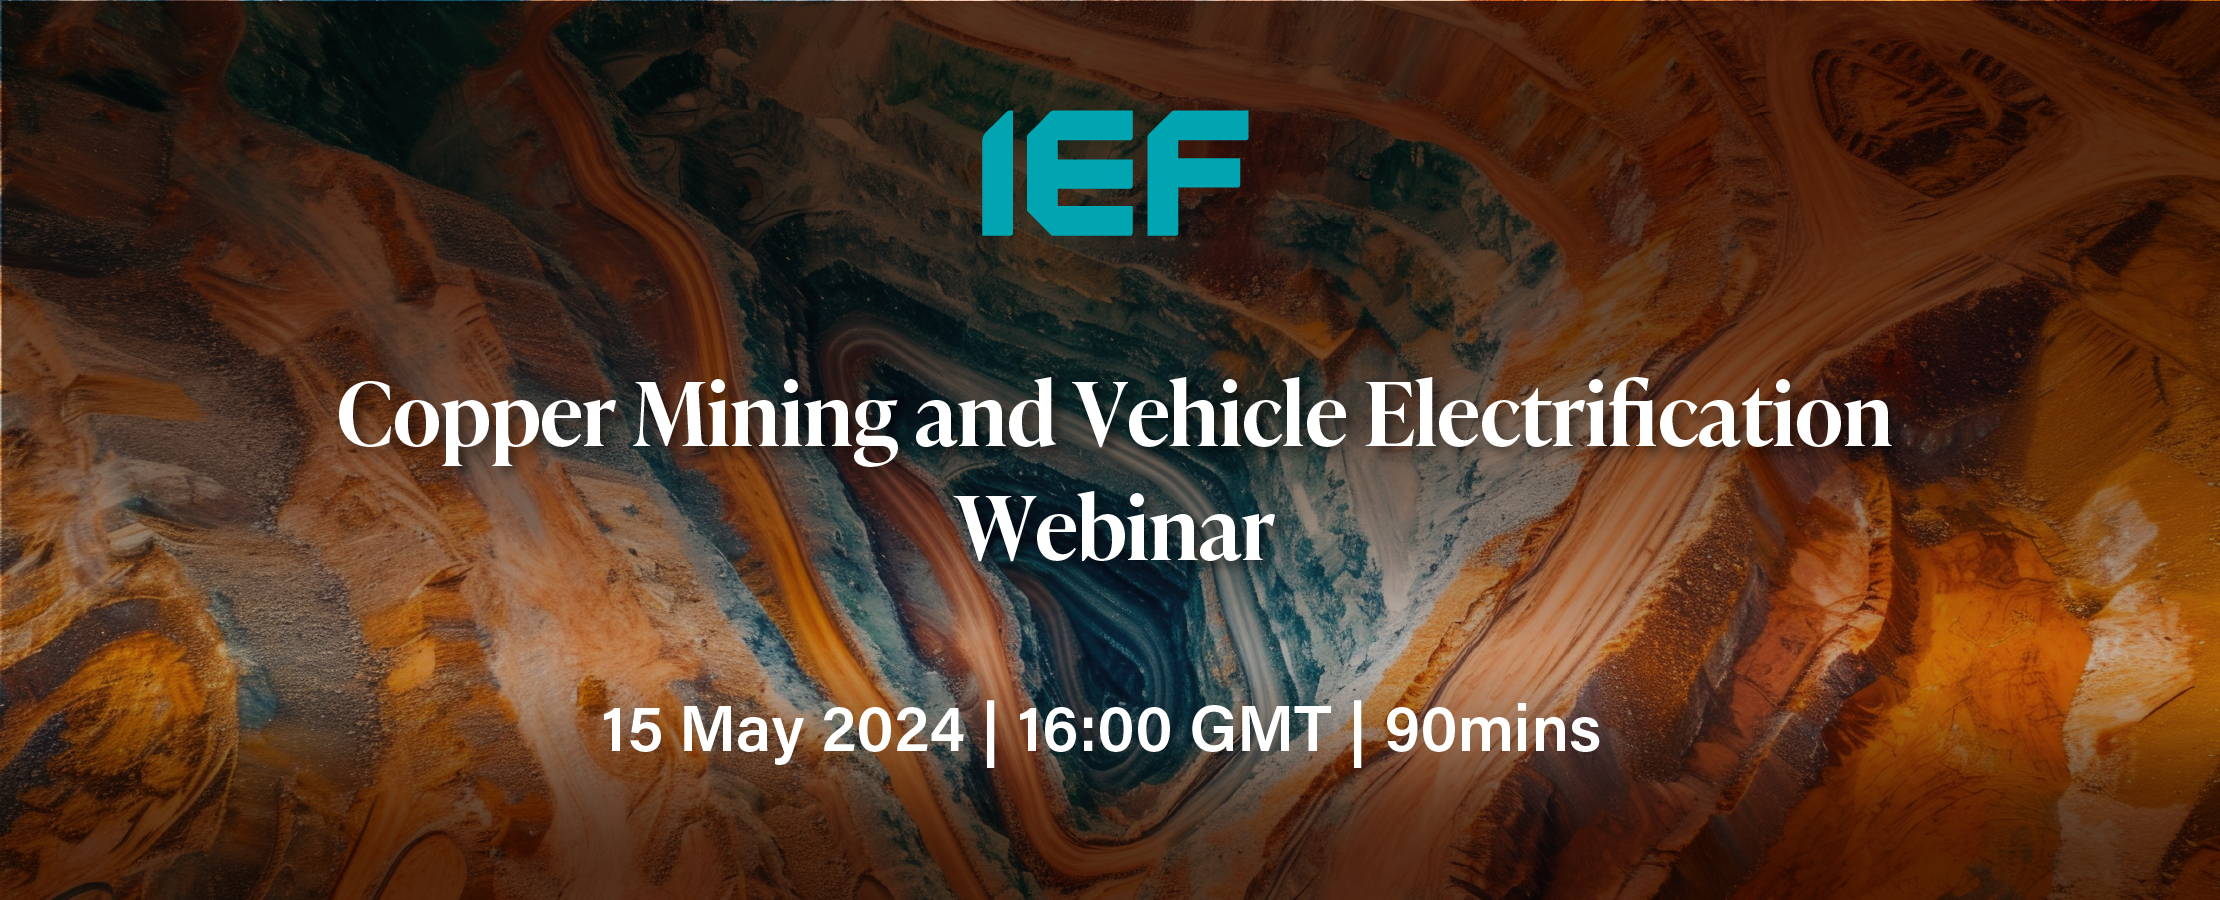 Copper Mining and Vehicle Electrification